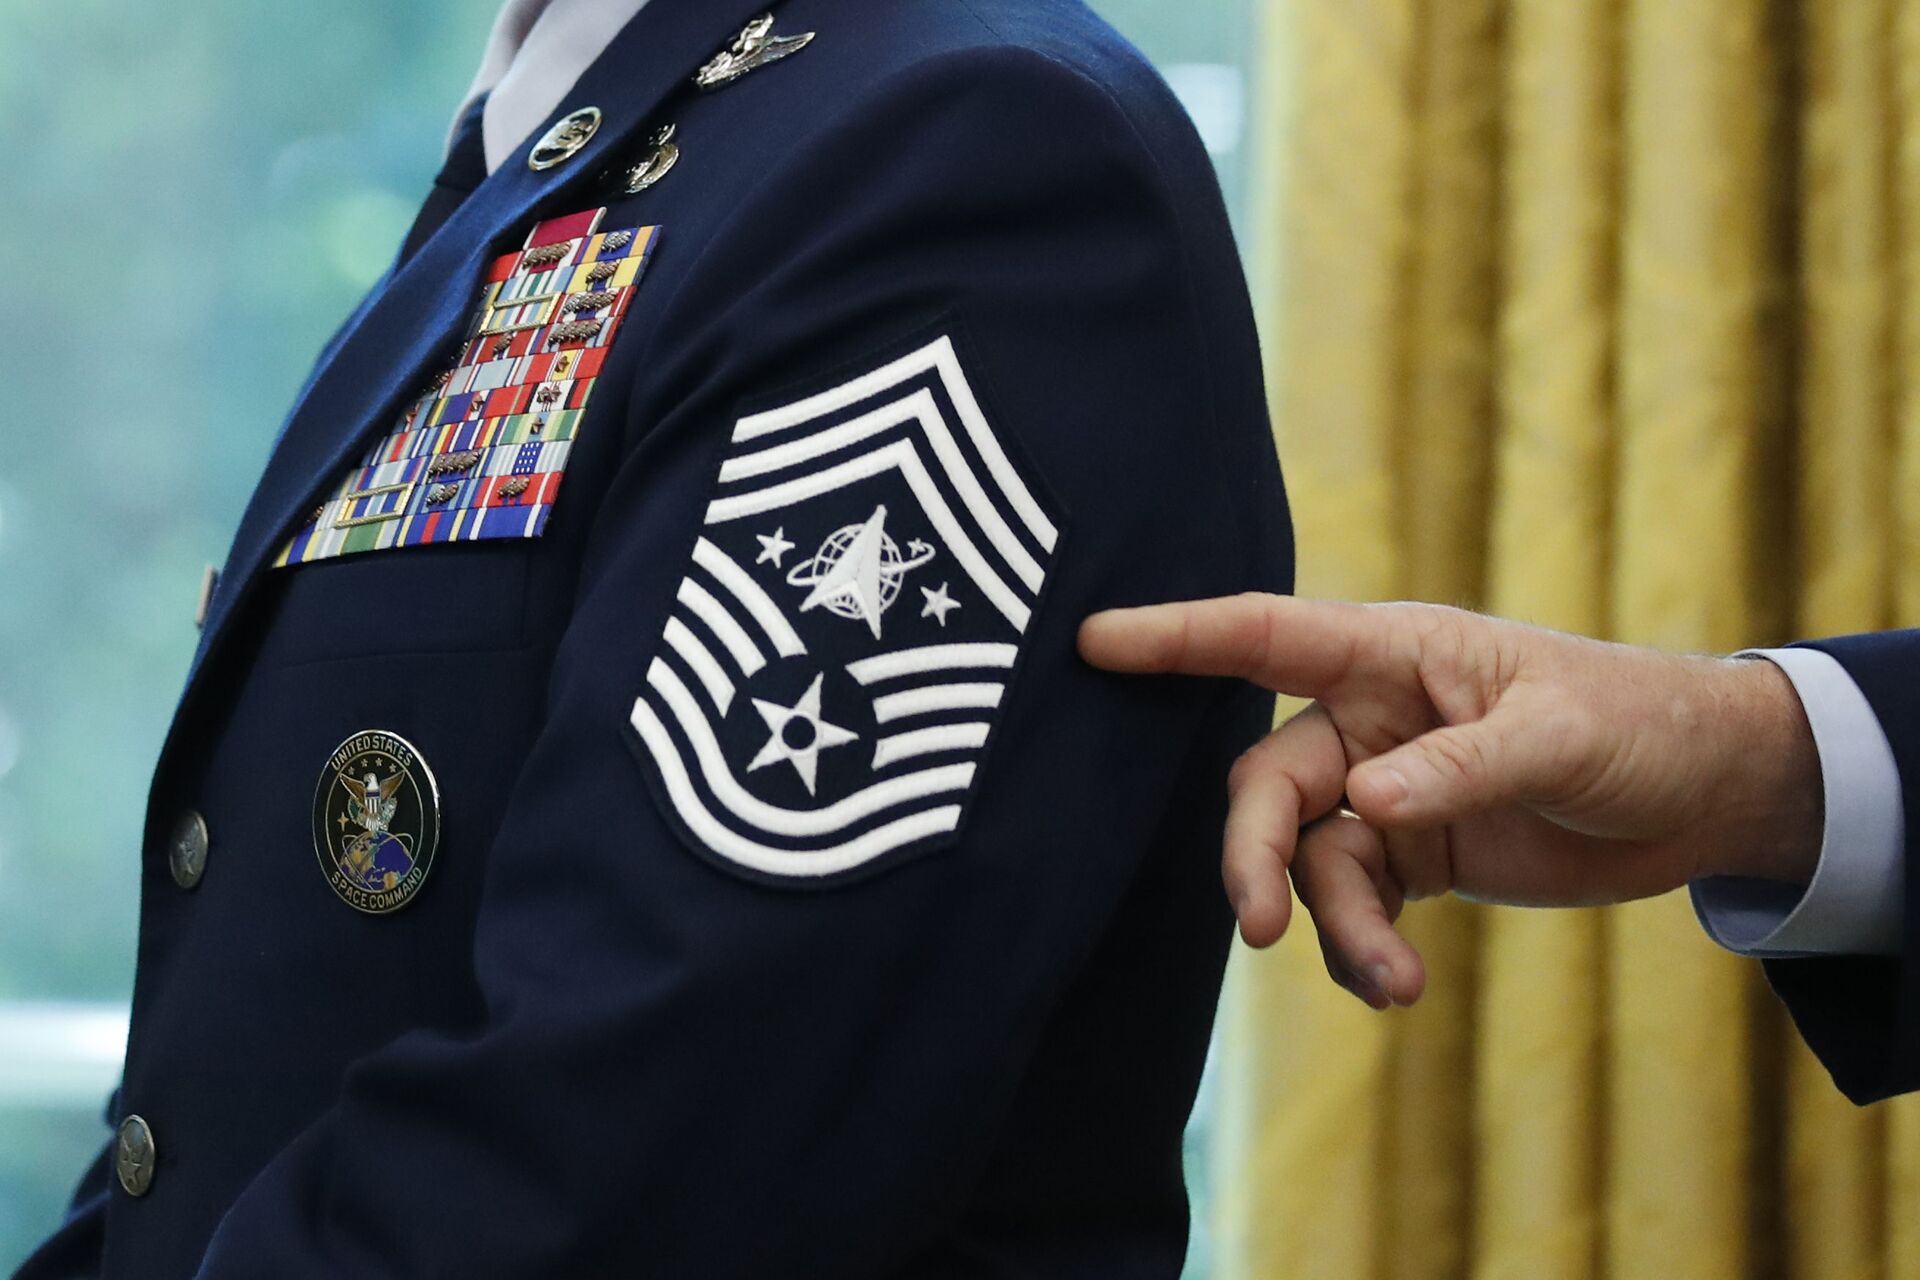  In this May 15, 2020, file photo, Chief Master Sgt. Roger Towberman displays his insignia during a presentation of the United States Space Force flag in the Oval Office of the White House in Washington - Sputnik International, 1920, 07.09.2021